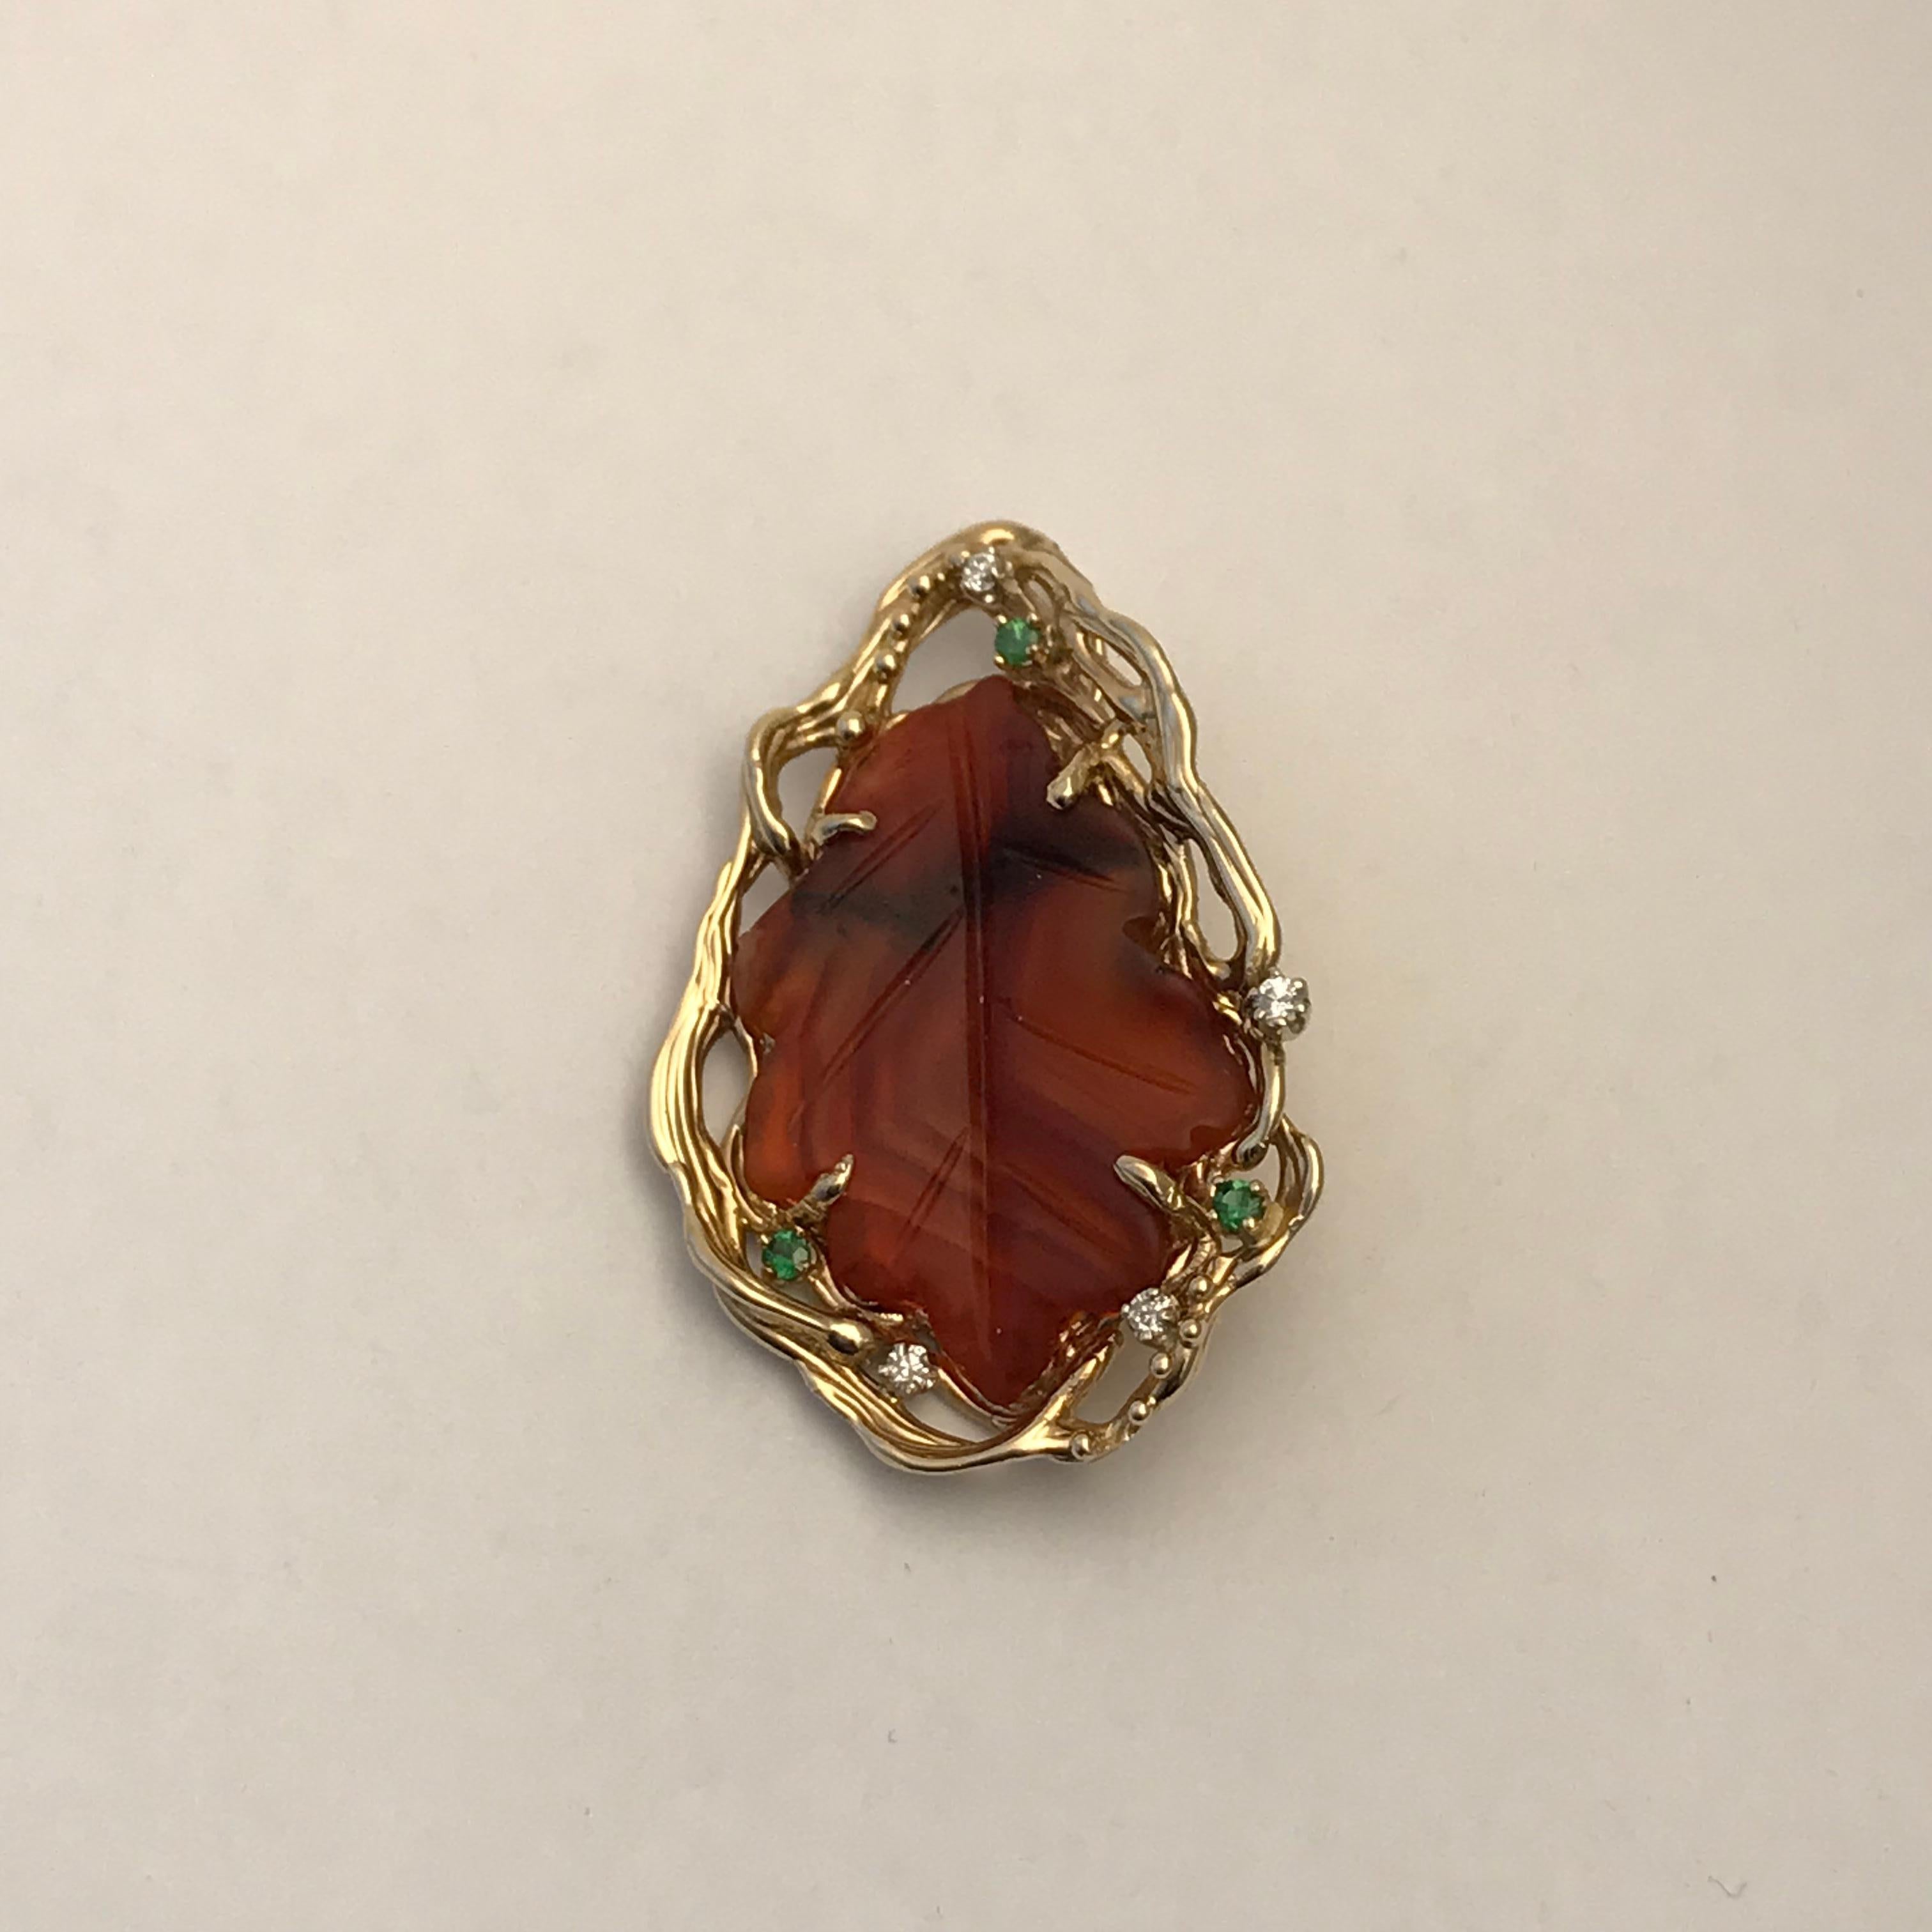 Lacuna Agate Leaf Pendant in 14 Karat Gold with Emeralds and Diamonds.

Agate Set with a free form design border in 14k yellow gold and accented with emeralds and diamonds

It is 100% natural in color nothing about it has been changed. Nature does